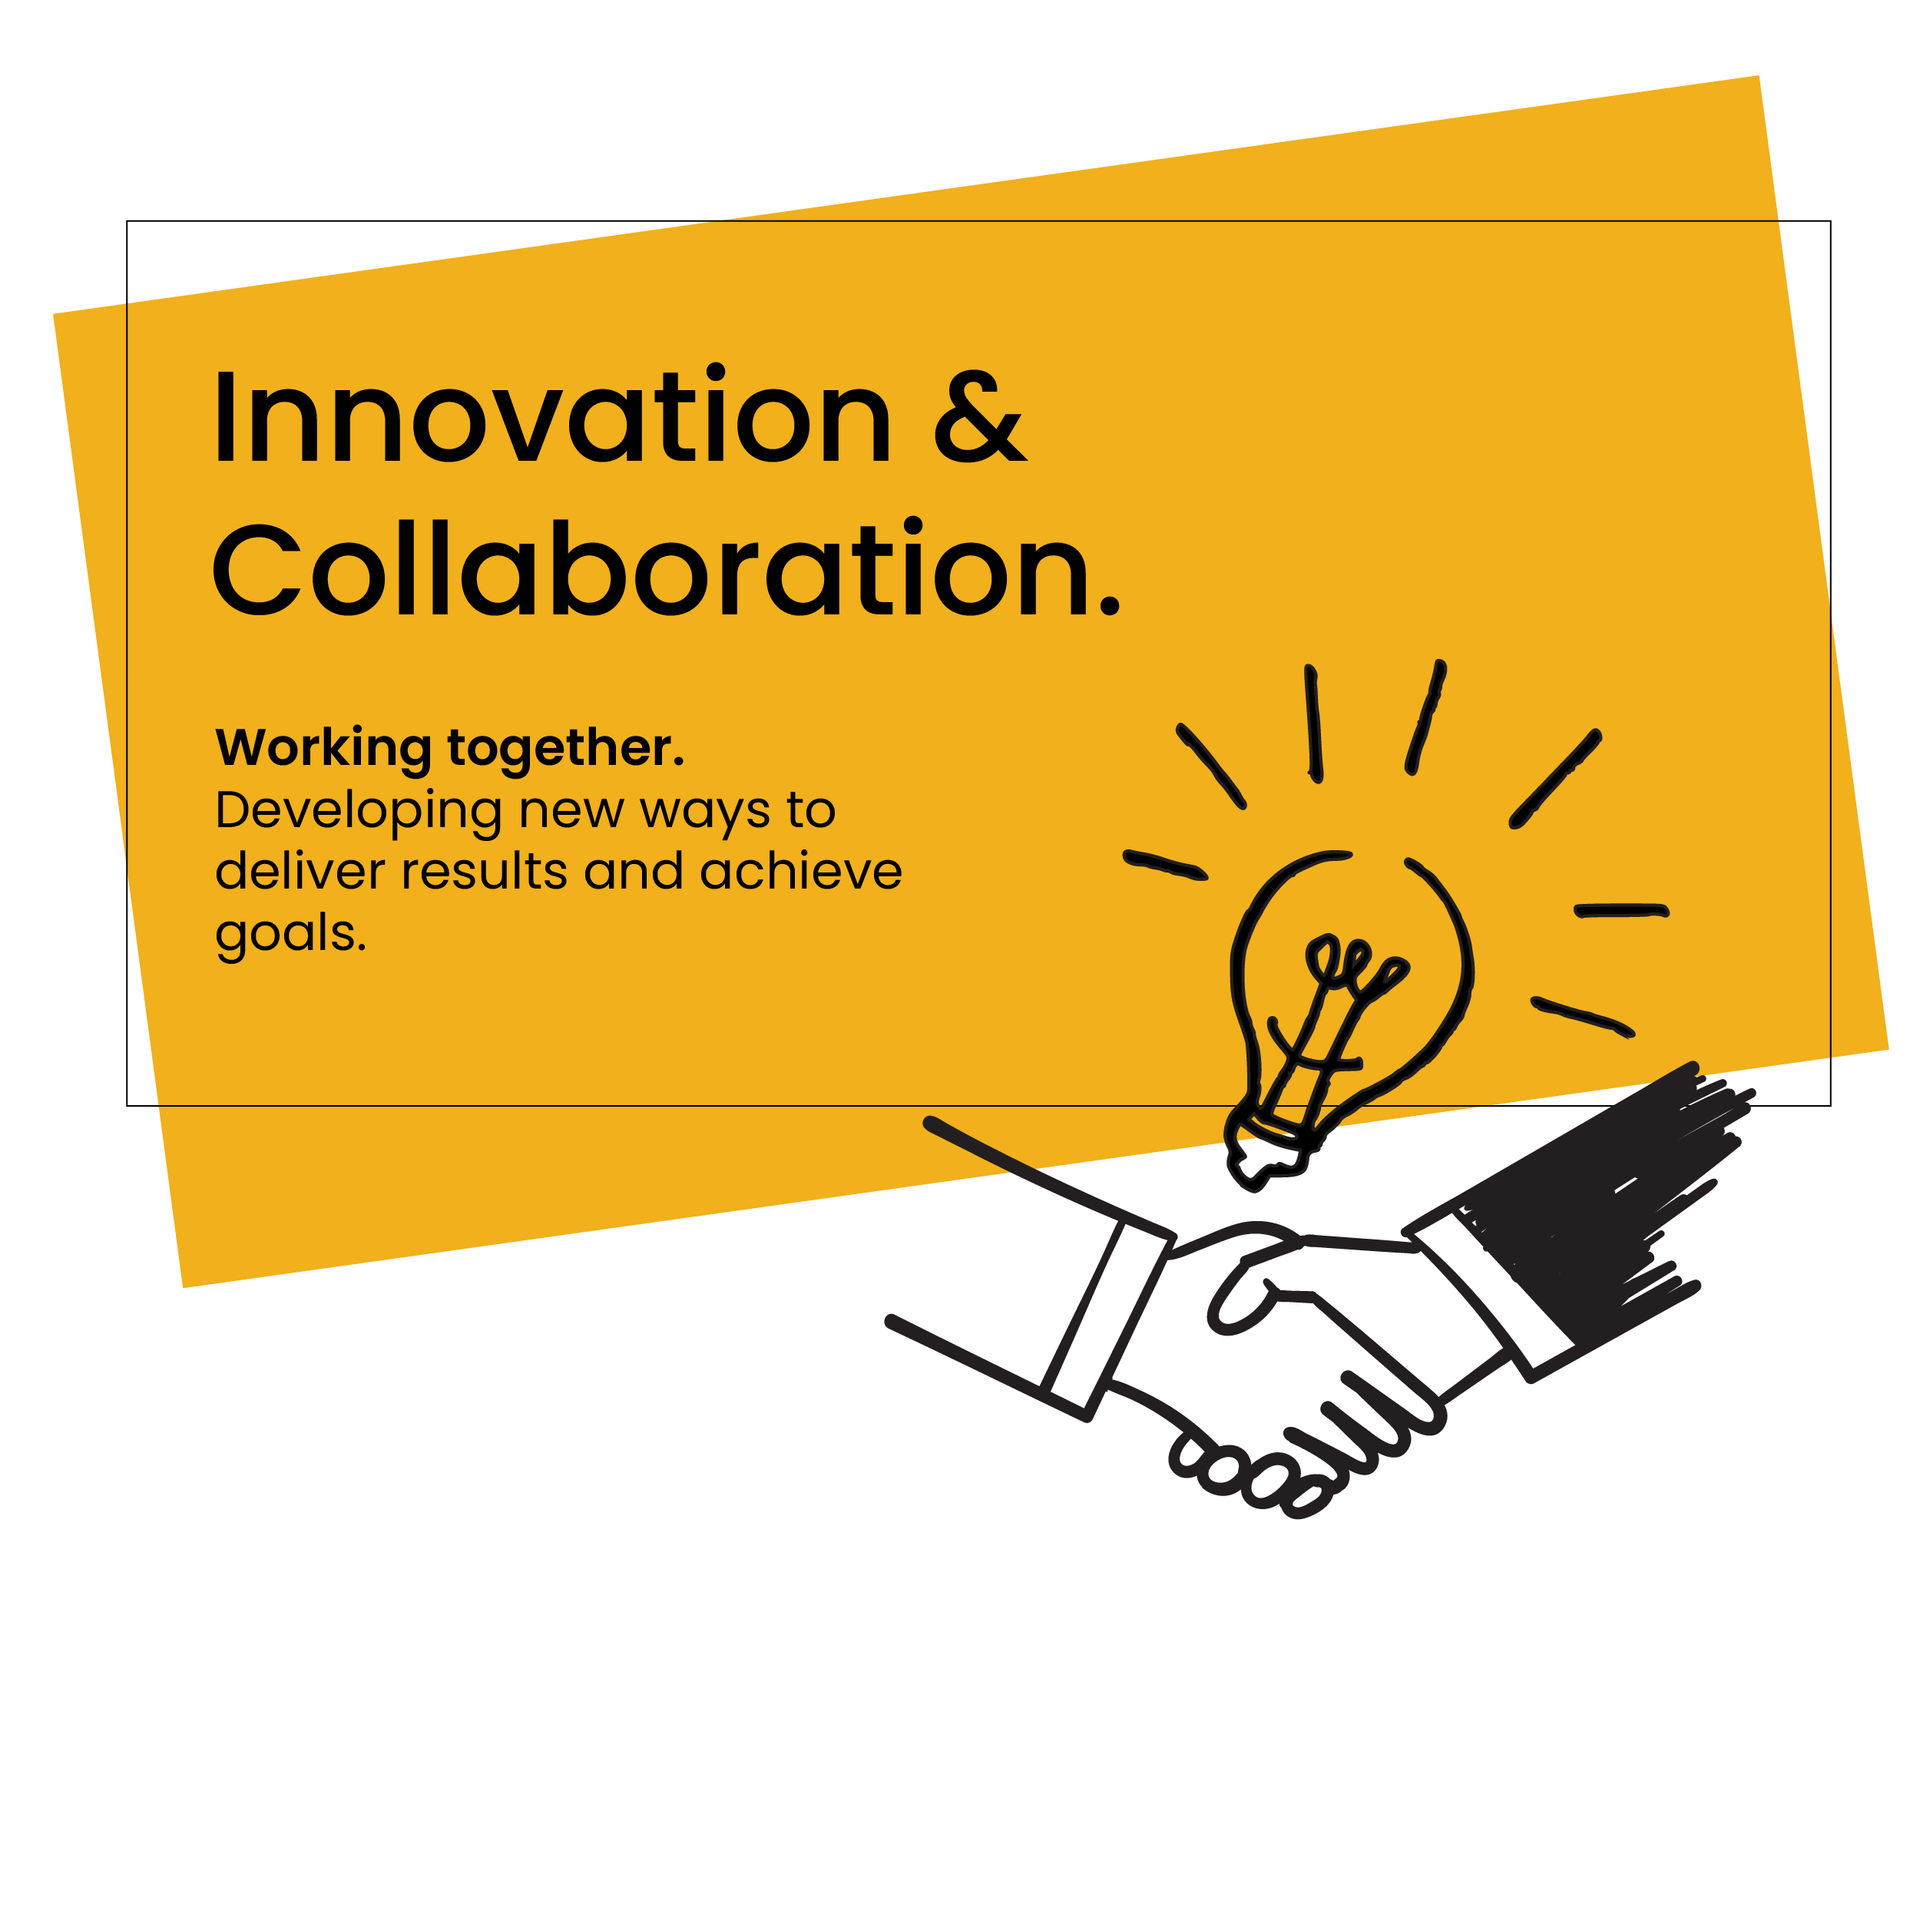 Handshake image with lightbulb to represent innovation and collaboration